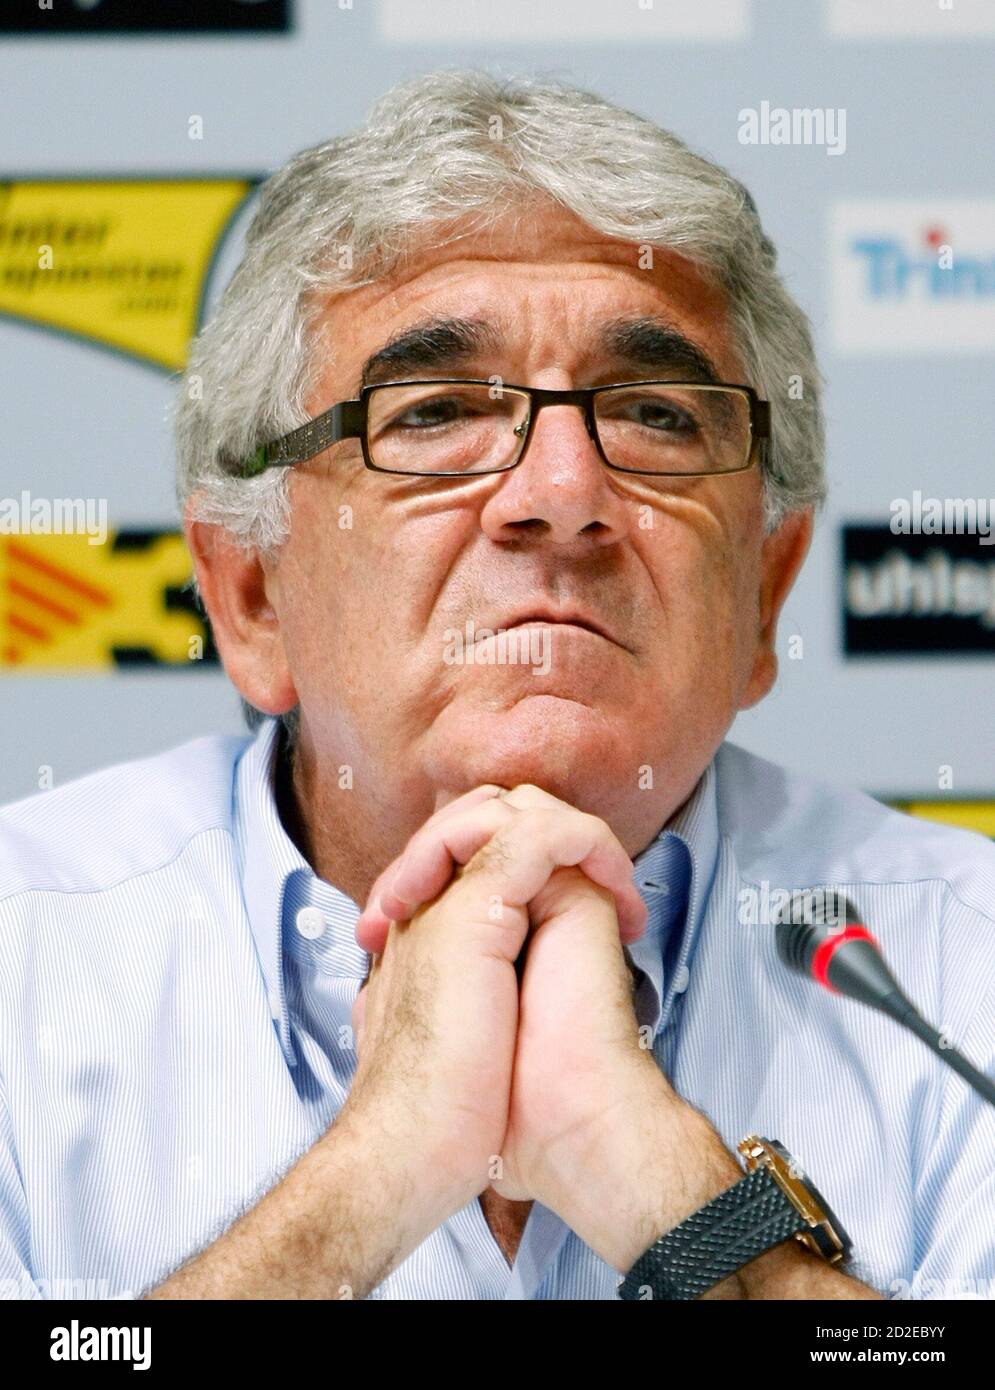 Espanyol's President Daniel Sanchez Llibre attends a news conference the official presentation of his new players in Barcelona August 27, 2009. REUTERS/Albert Gea (SPAIN HEADSHOT de stock - Alamy